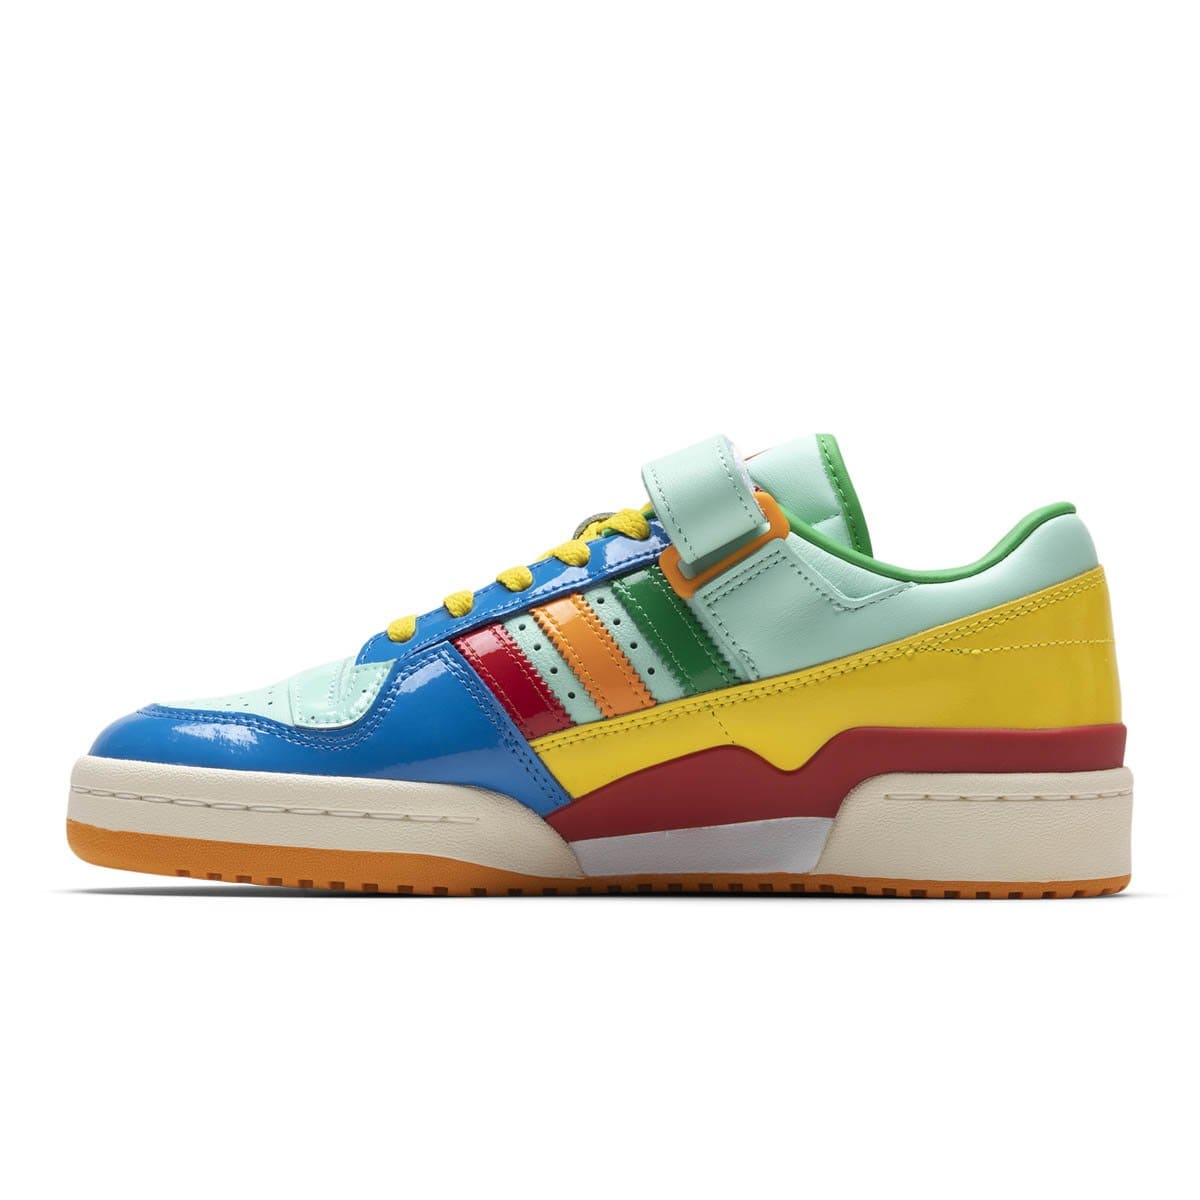 adidas Casual x Kerwin Frost FORUM LOW BENCHCMATE